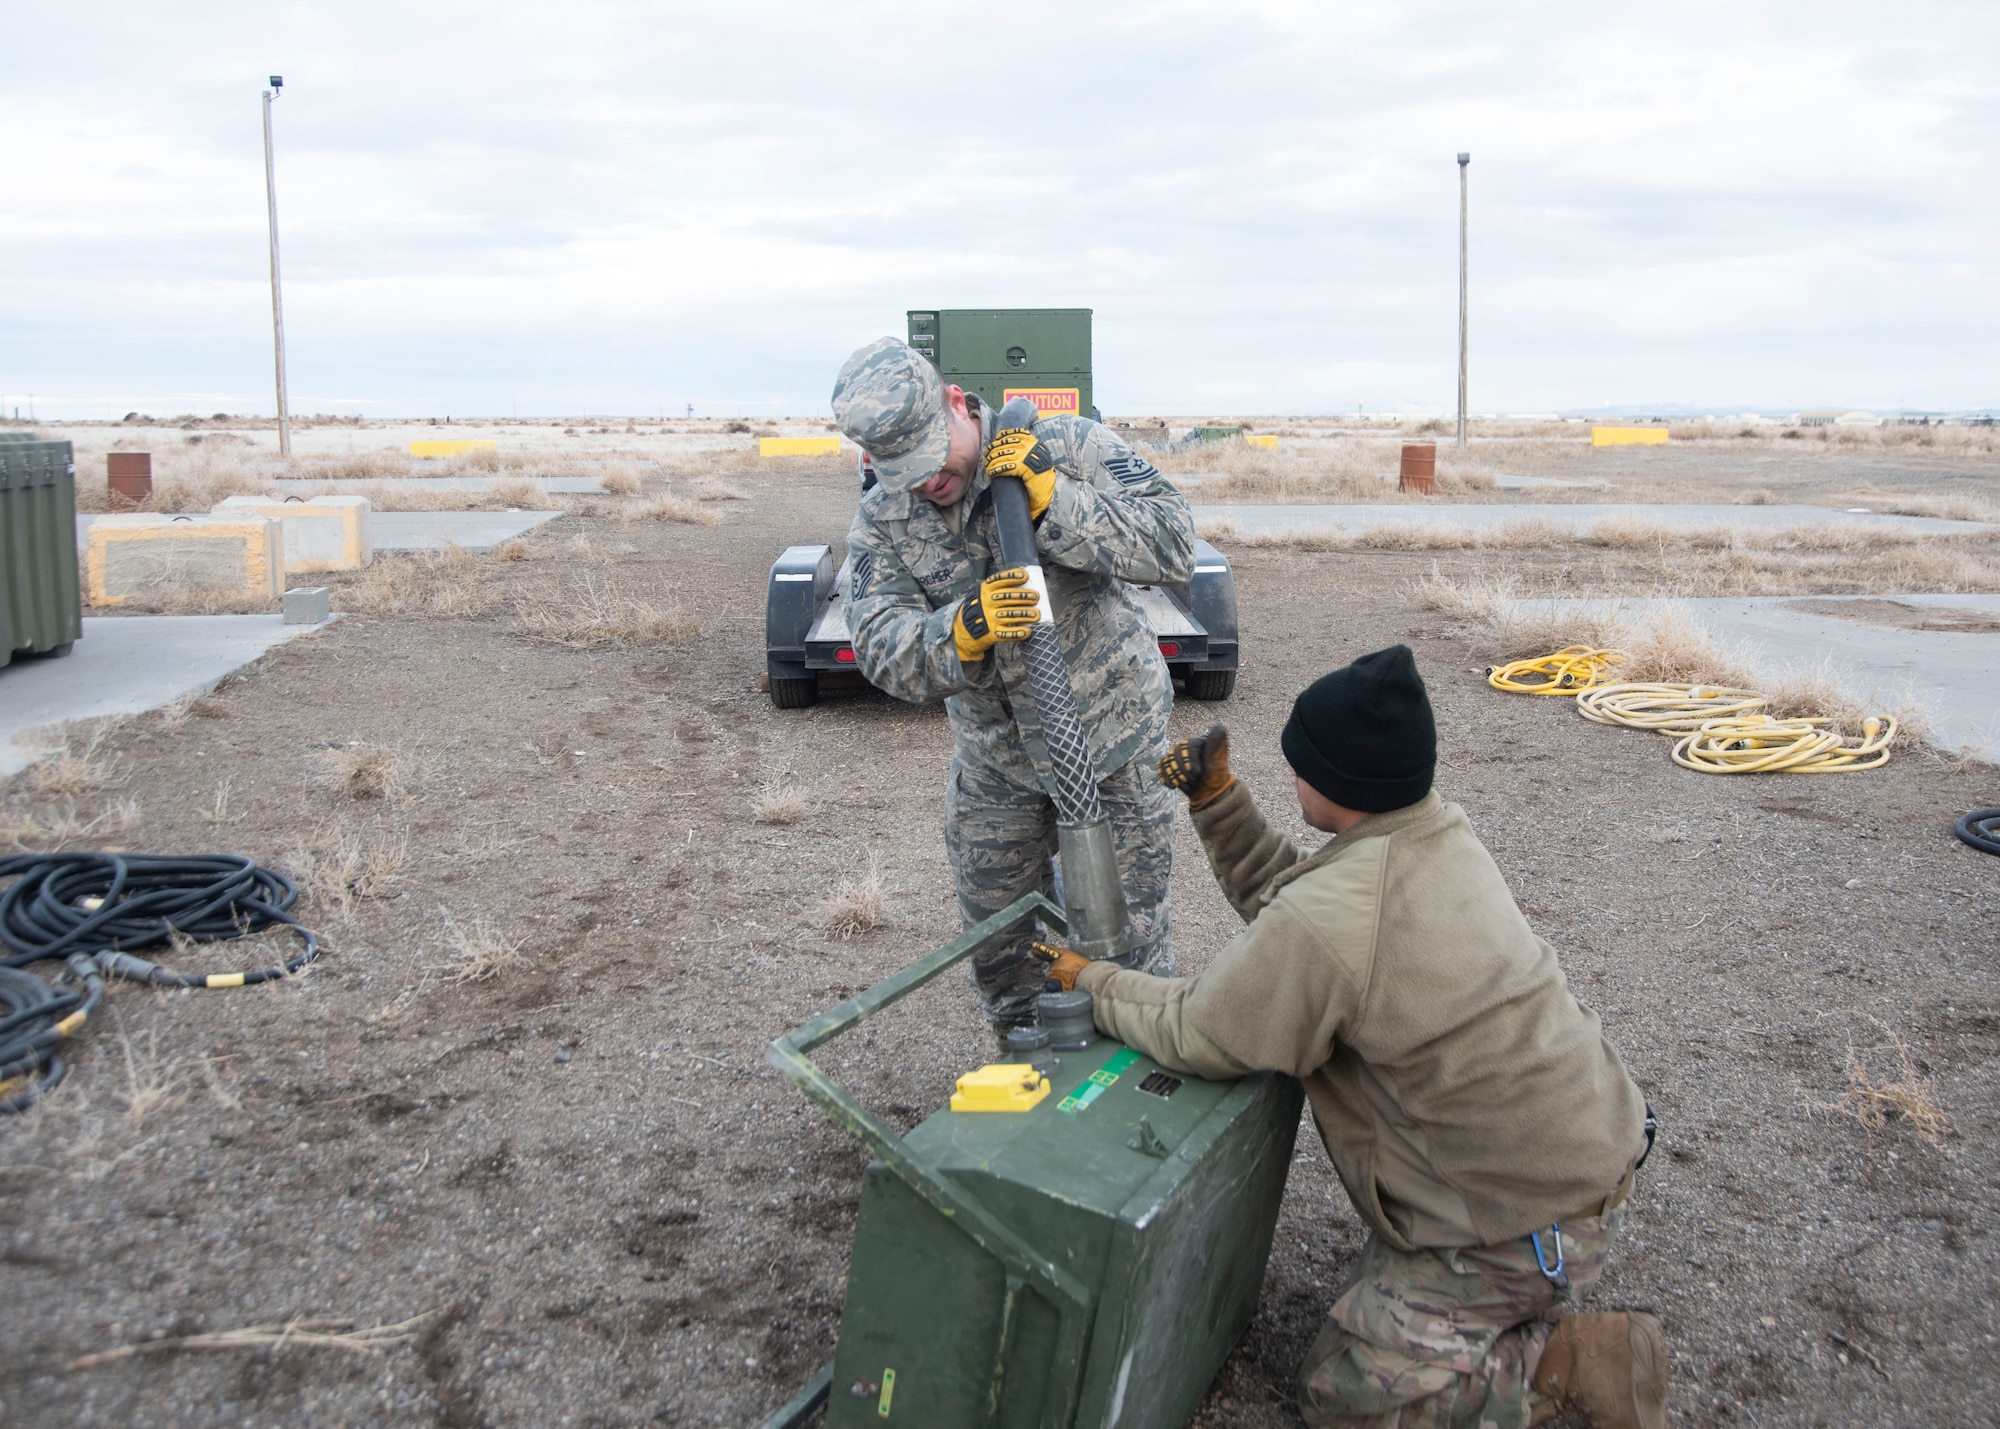 U.S. Air Force Tech. Sgt. Chris Archer, 366th Civil Engineering Squadron power production craftsman, assists Staff Sgt. Kevin Rivera Calzada, 366th Civil Engineering Squadron power production journeyman in setting up a remote power source, Jan. 23, 2020, on Mountain Home Air Force Base, Idaho. This is part of the structural build-up of the Base Emergency Engineer Force training which produces multicapable Airmen. (U.S. Air Force photo by Airman 1st Class Akeem K. Campbell)